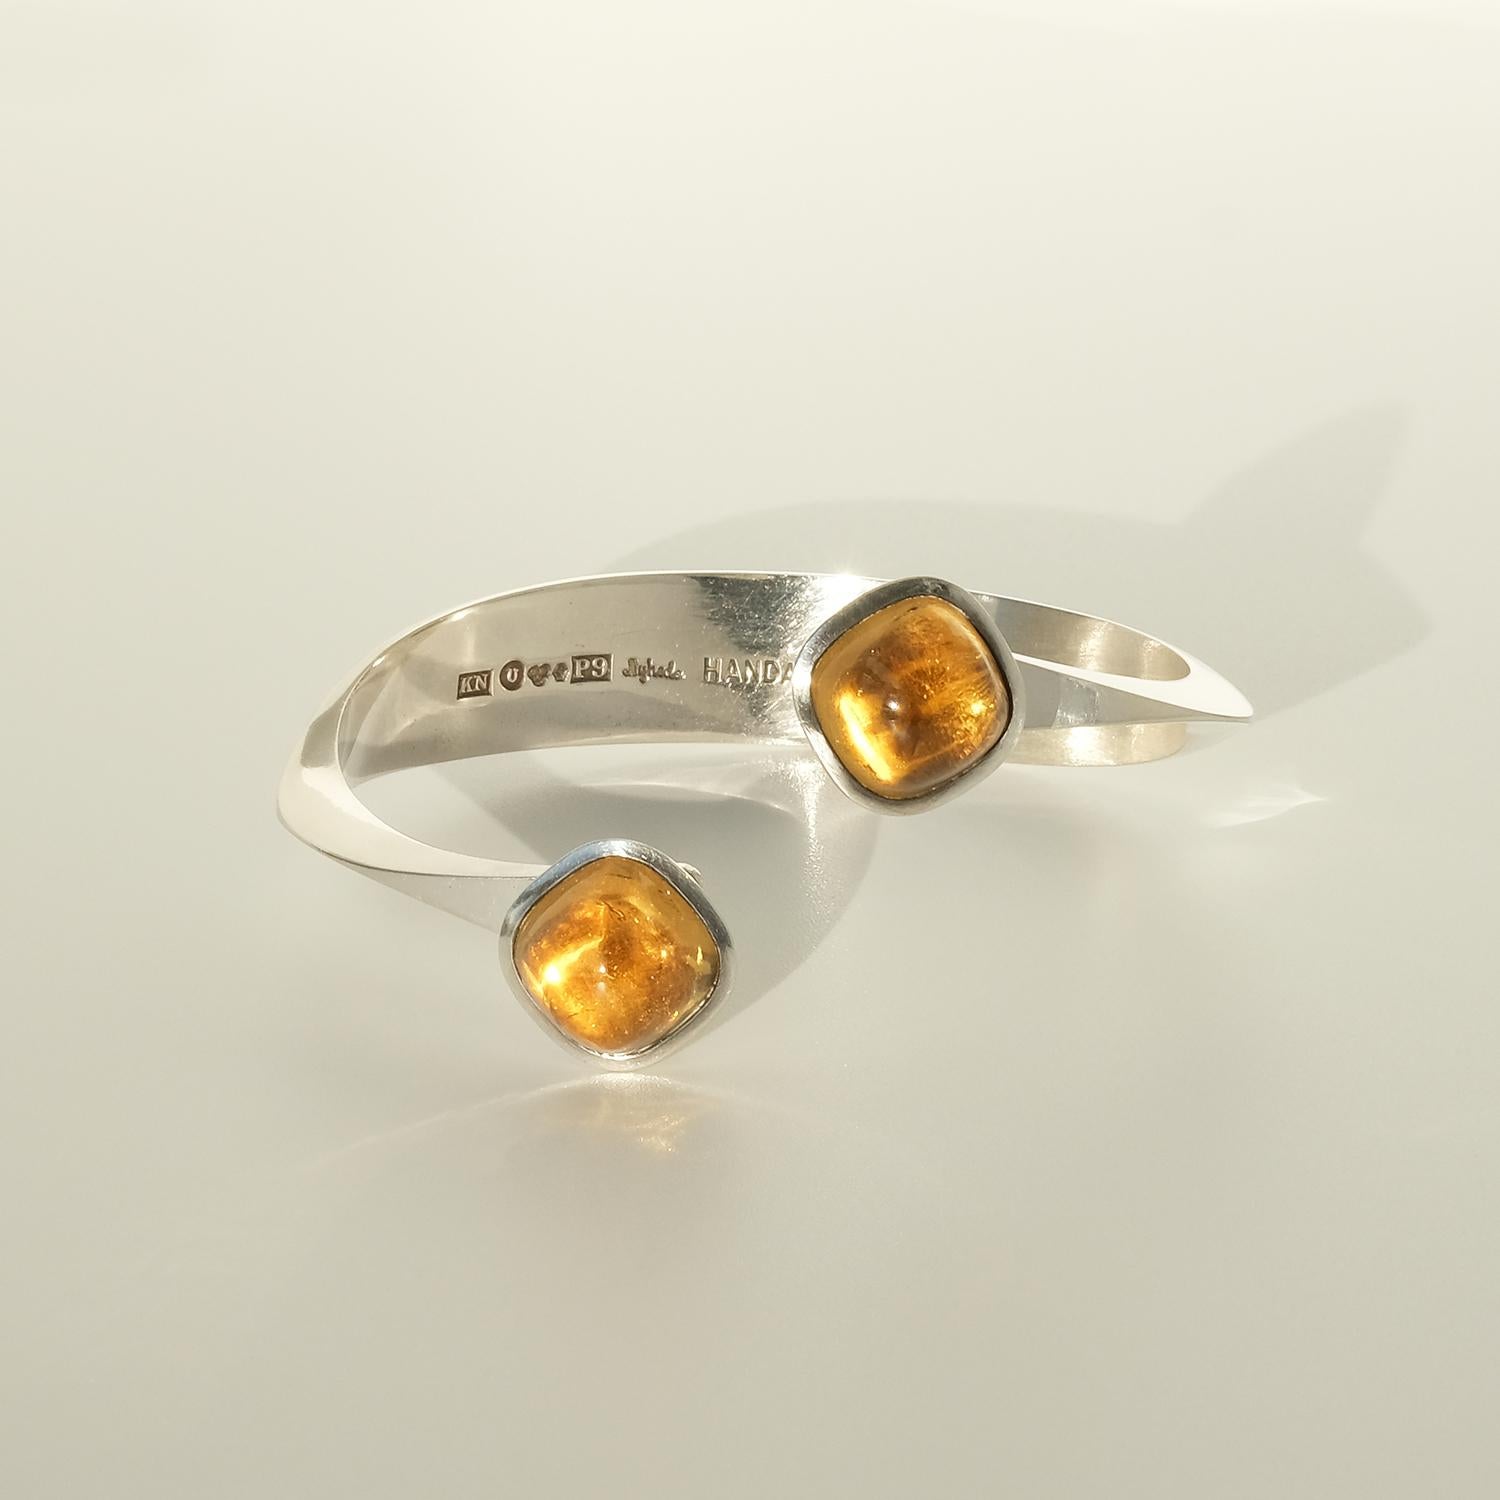 This silver cuff bracelet is adorned with two golden brown citrines that are mounted on silver square barrels. Once in place, the gemstones and their barrels look like powerful bowls of fire. The silver braclet itself is twisted on each side on its